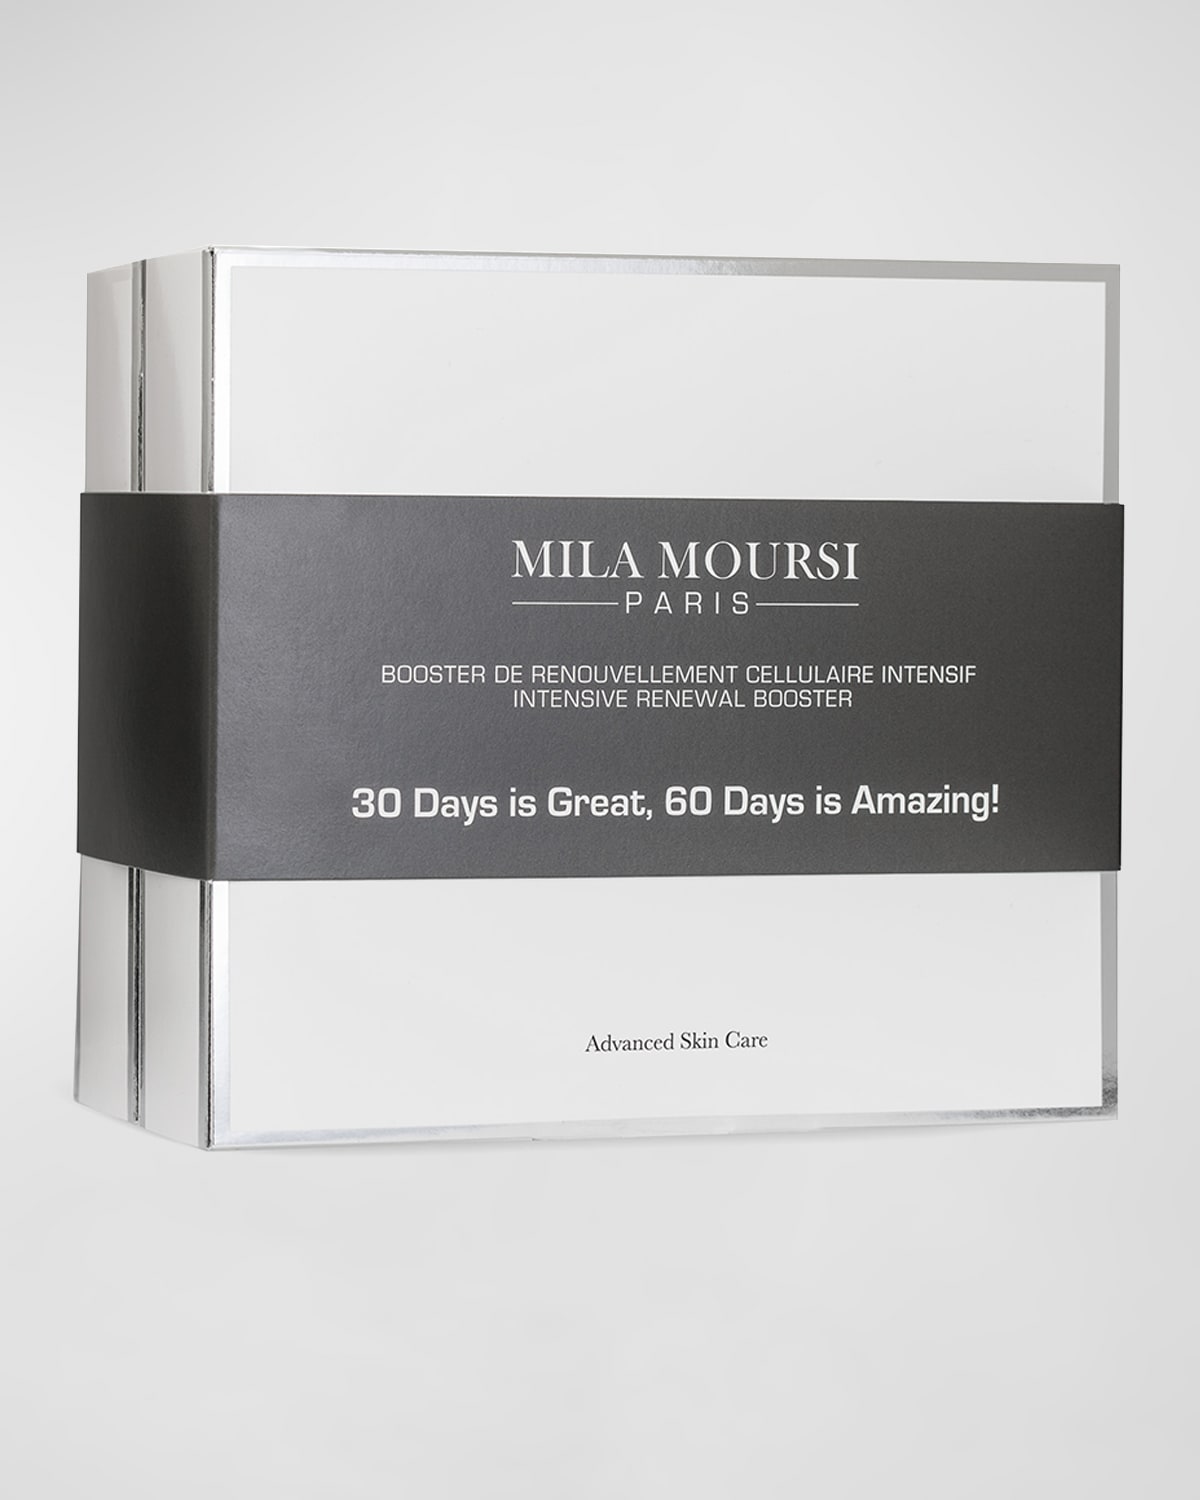 Mila Moursi Intensive Renewal Booster ($1150 Value)